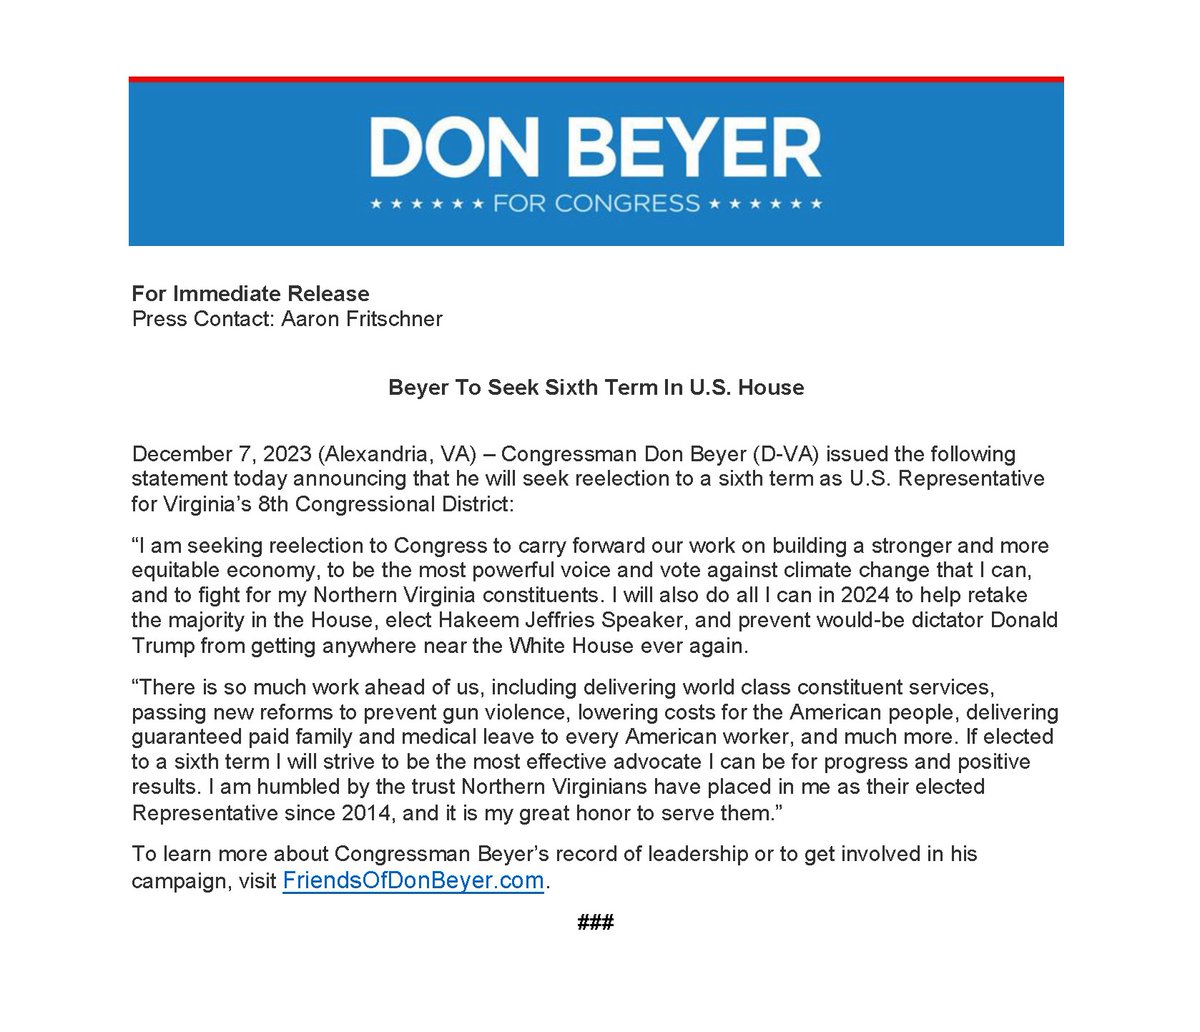 Today I announce my campaign for reelection to represent Virginia’s 8th Congressional District. I promise to be the most effective advocate I can be for progress and to continue fighting for my Northern Virginia constituents.